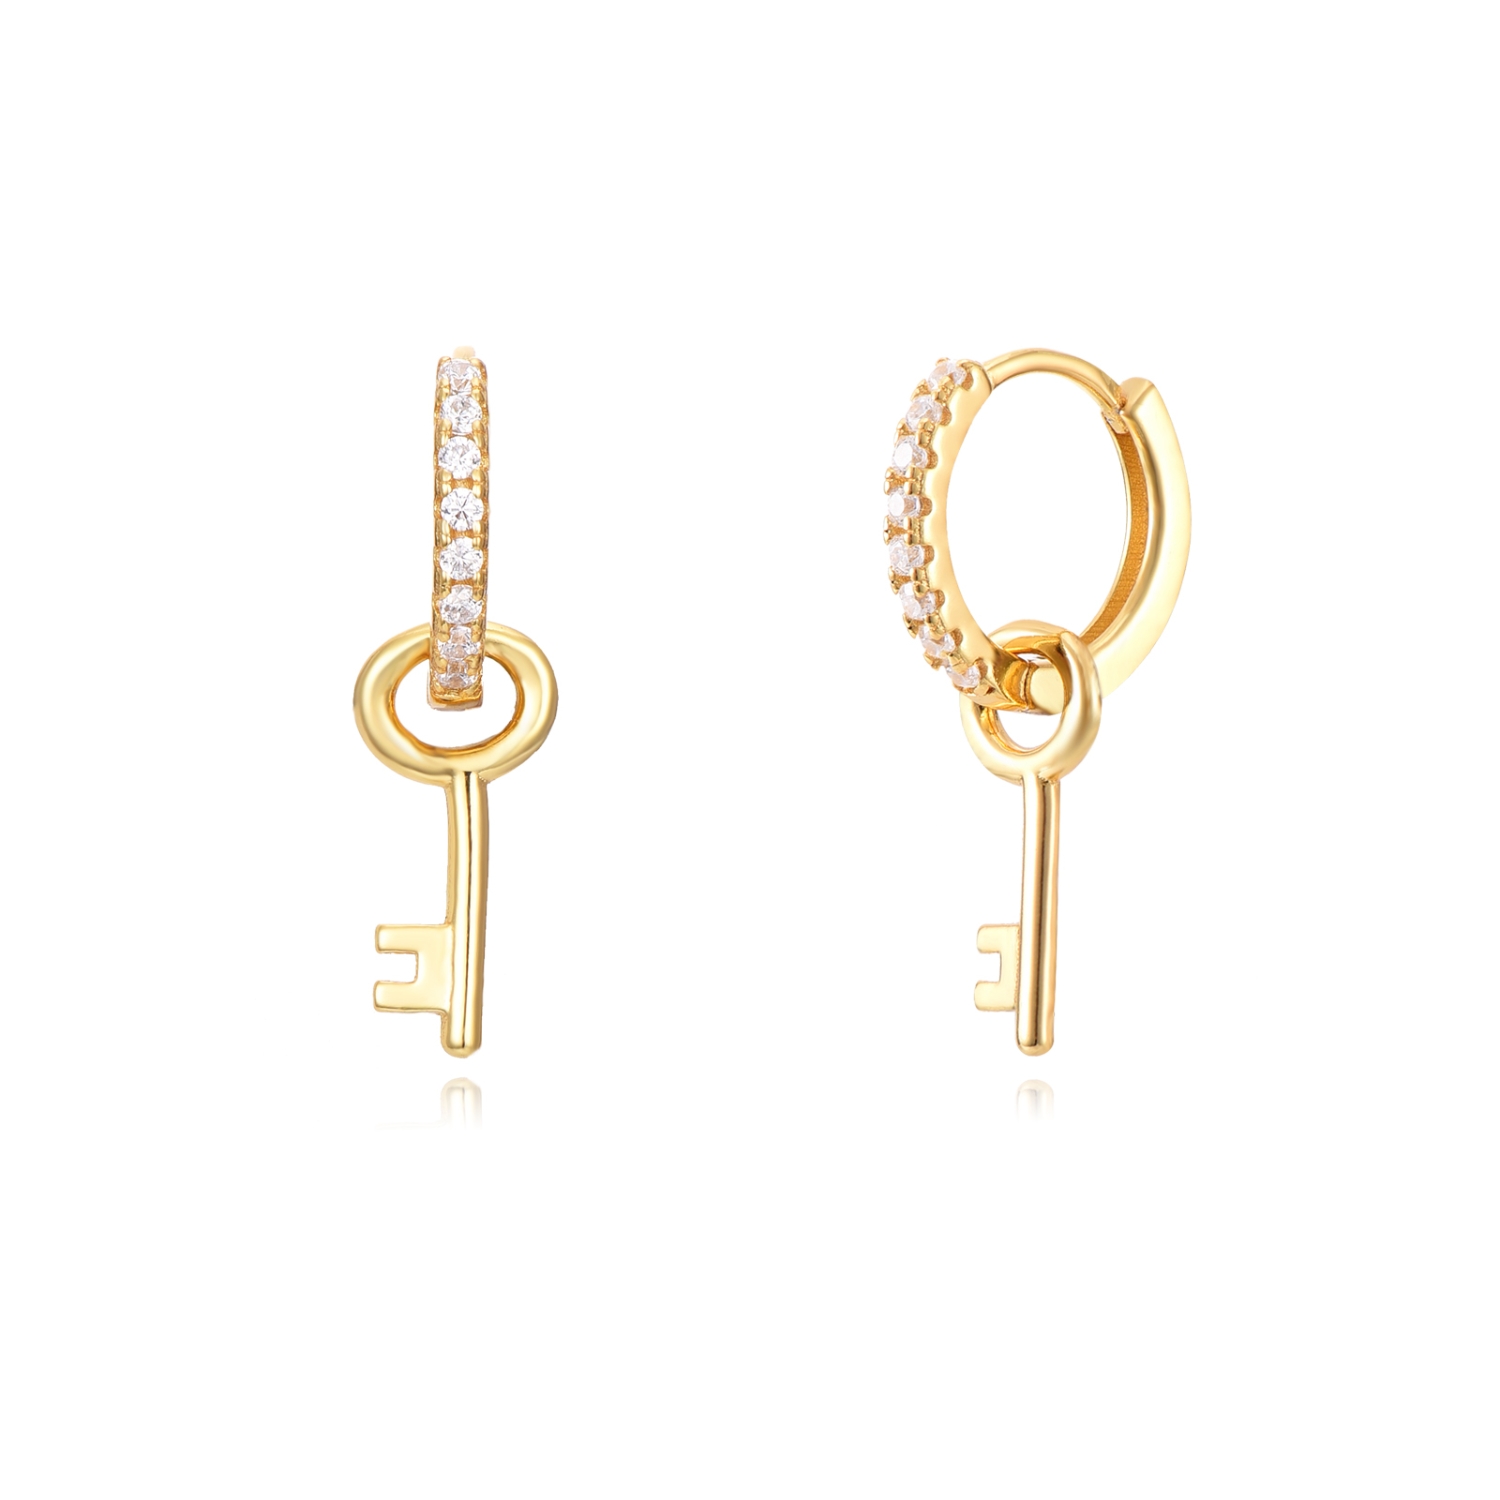 KEY AND LOCK HOOP EARRINGS- 14k Yellow Gold - The Littl A$104.99 A$104.99  14k Yellow Gold 30off cheap